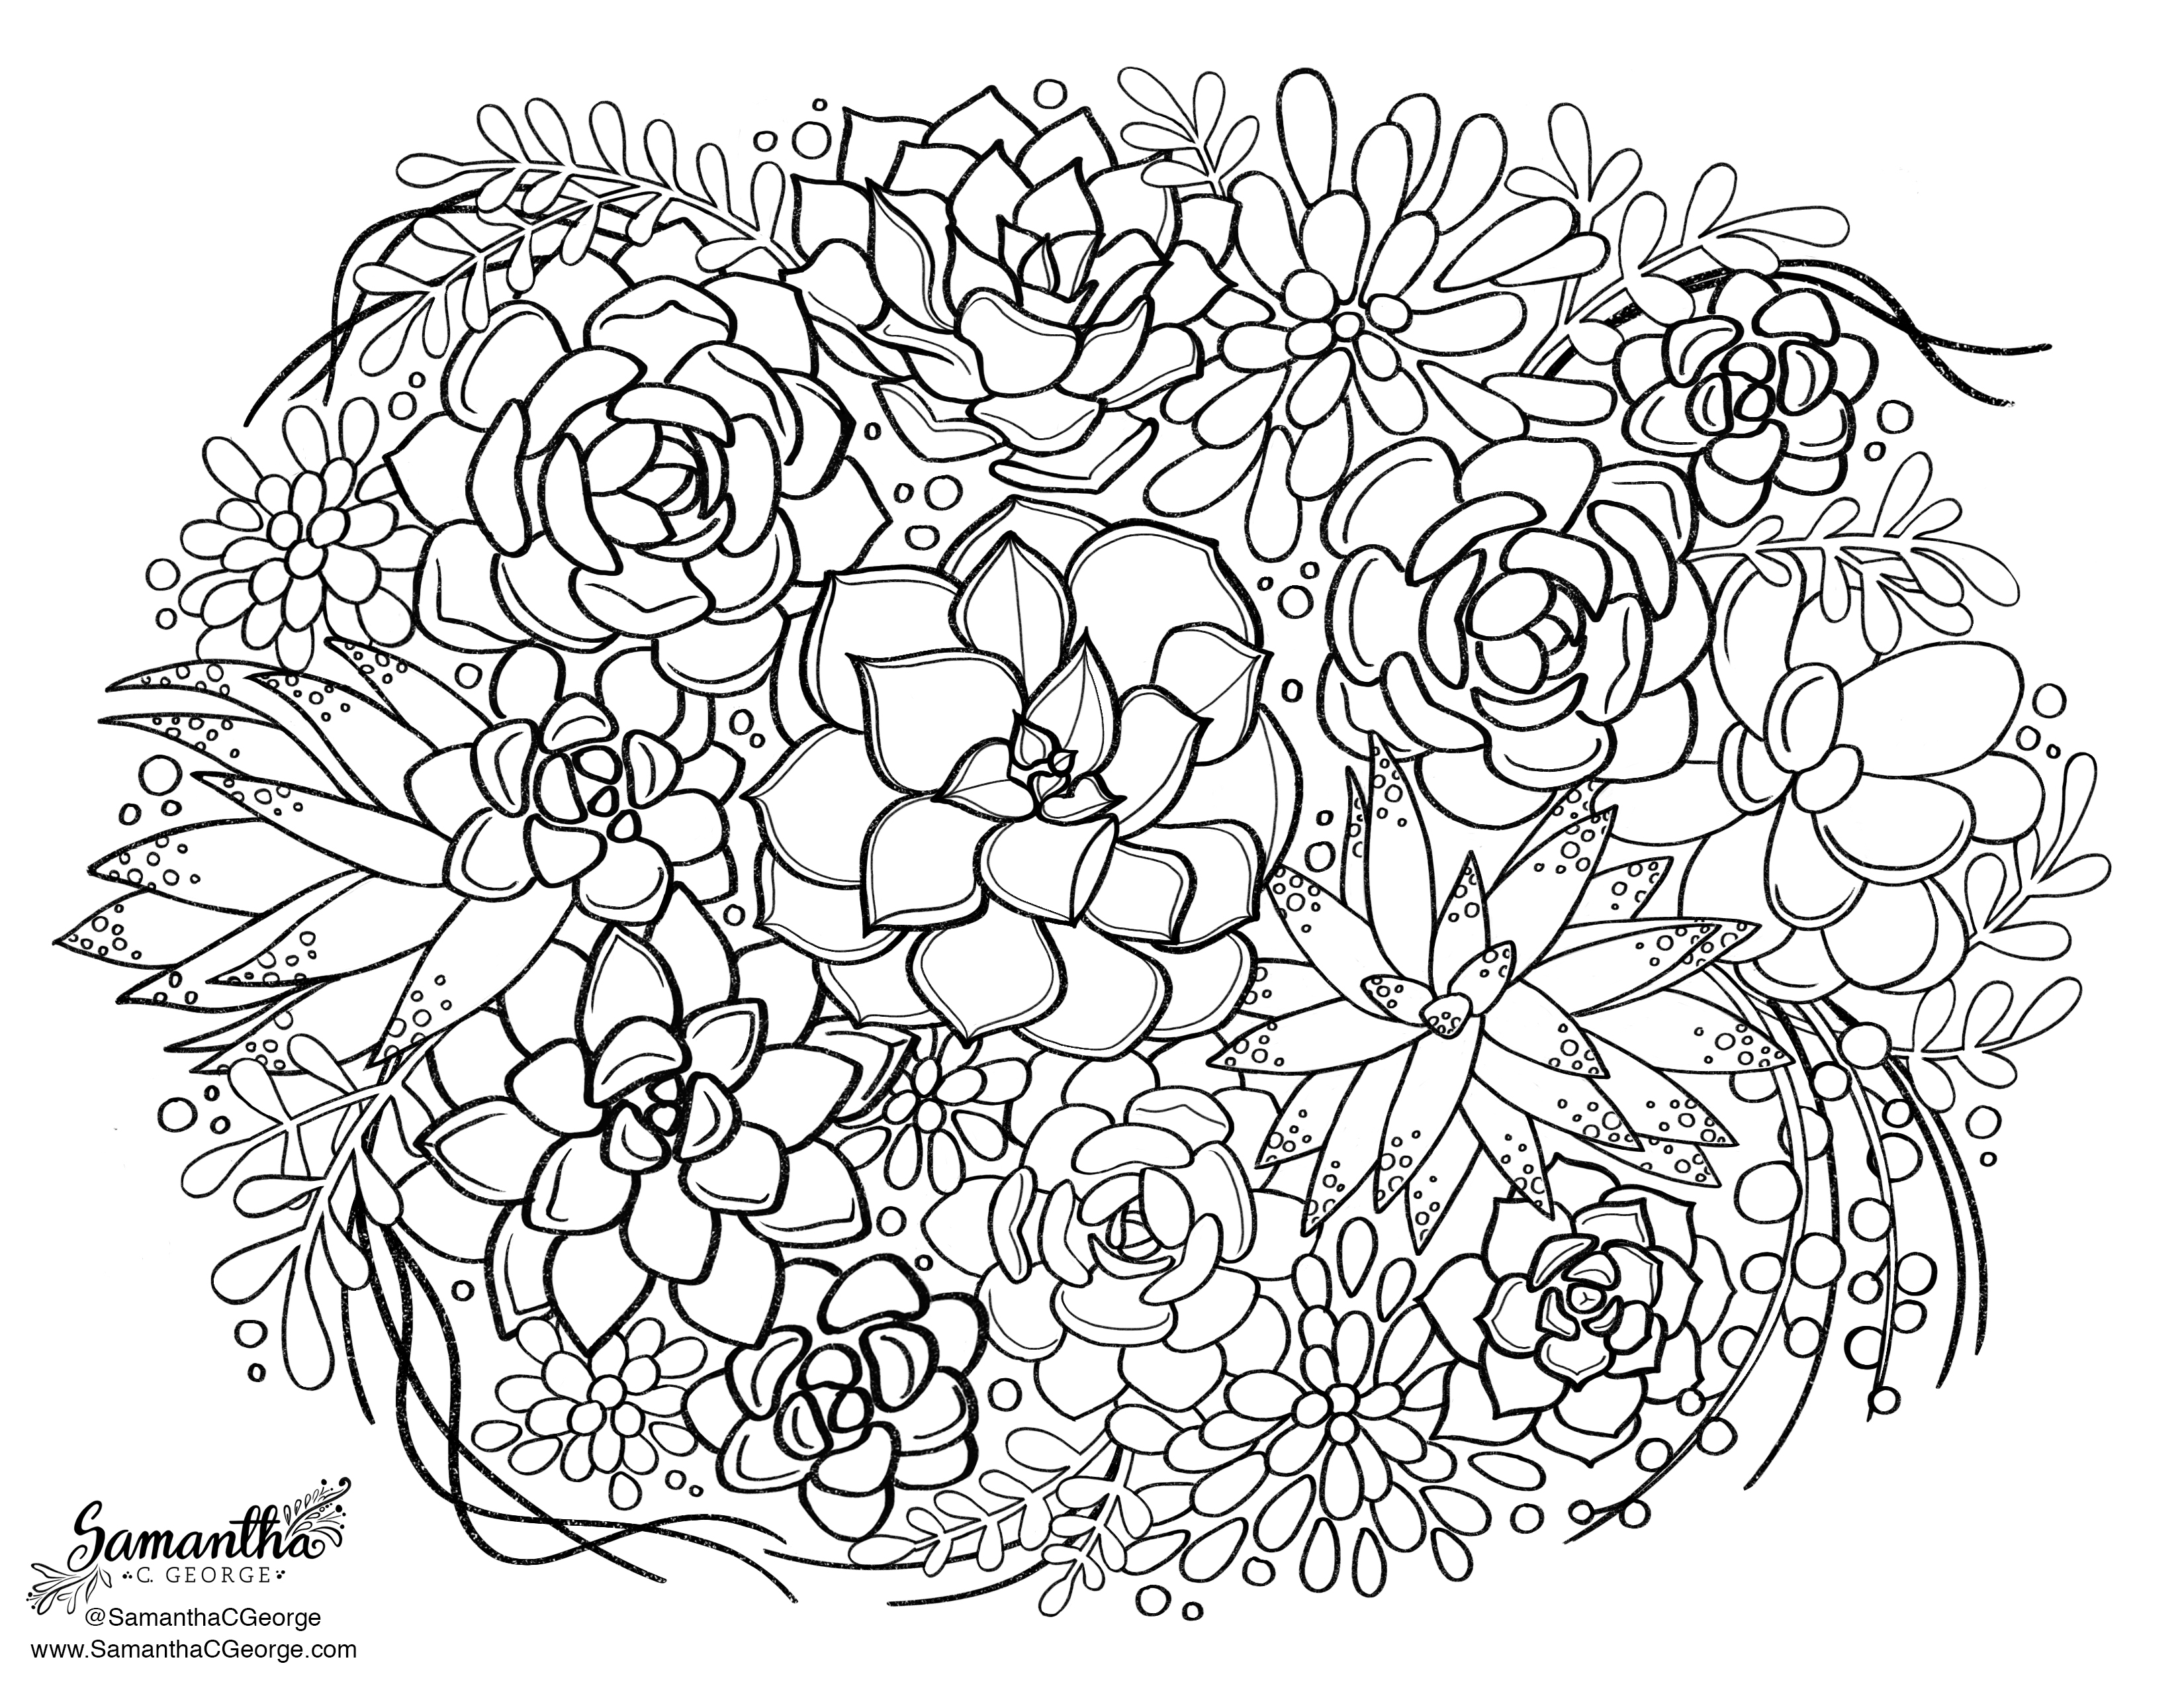 Succulent Coloring Page – Samantha C George